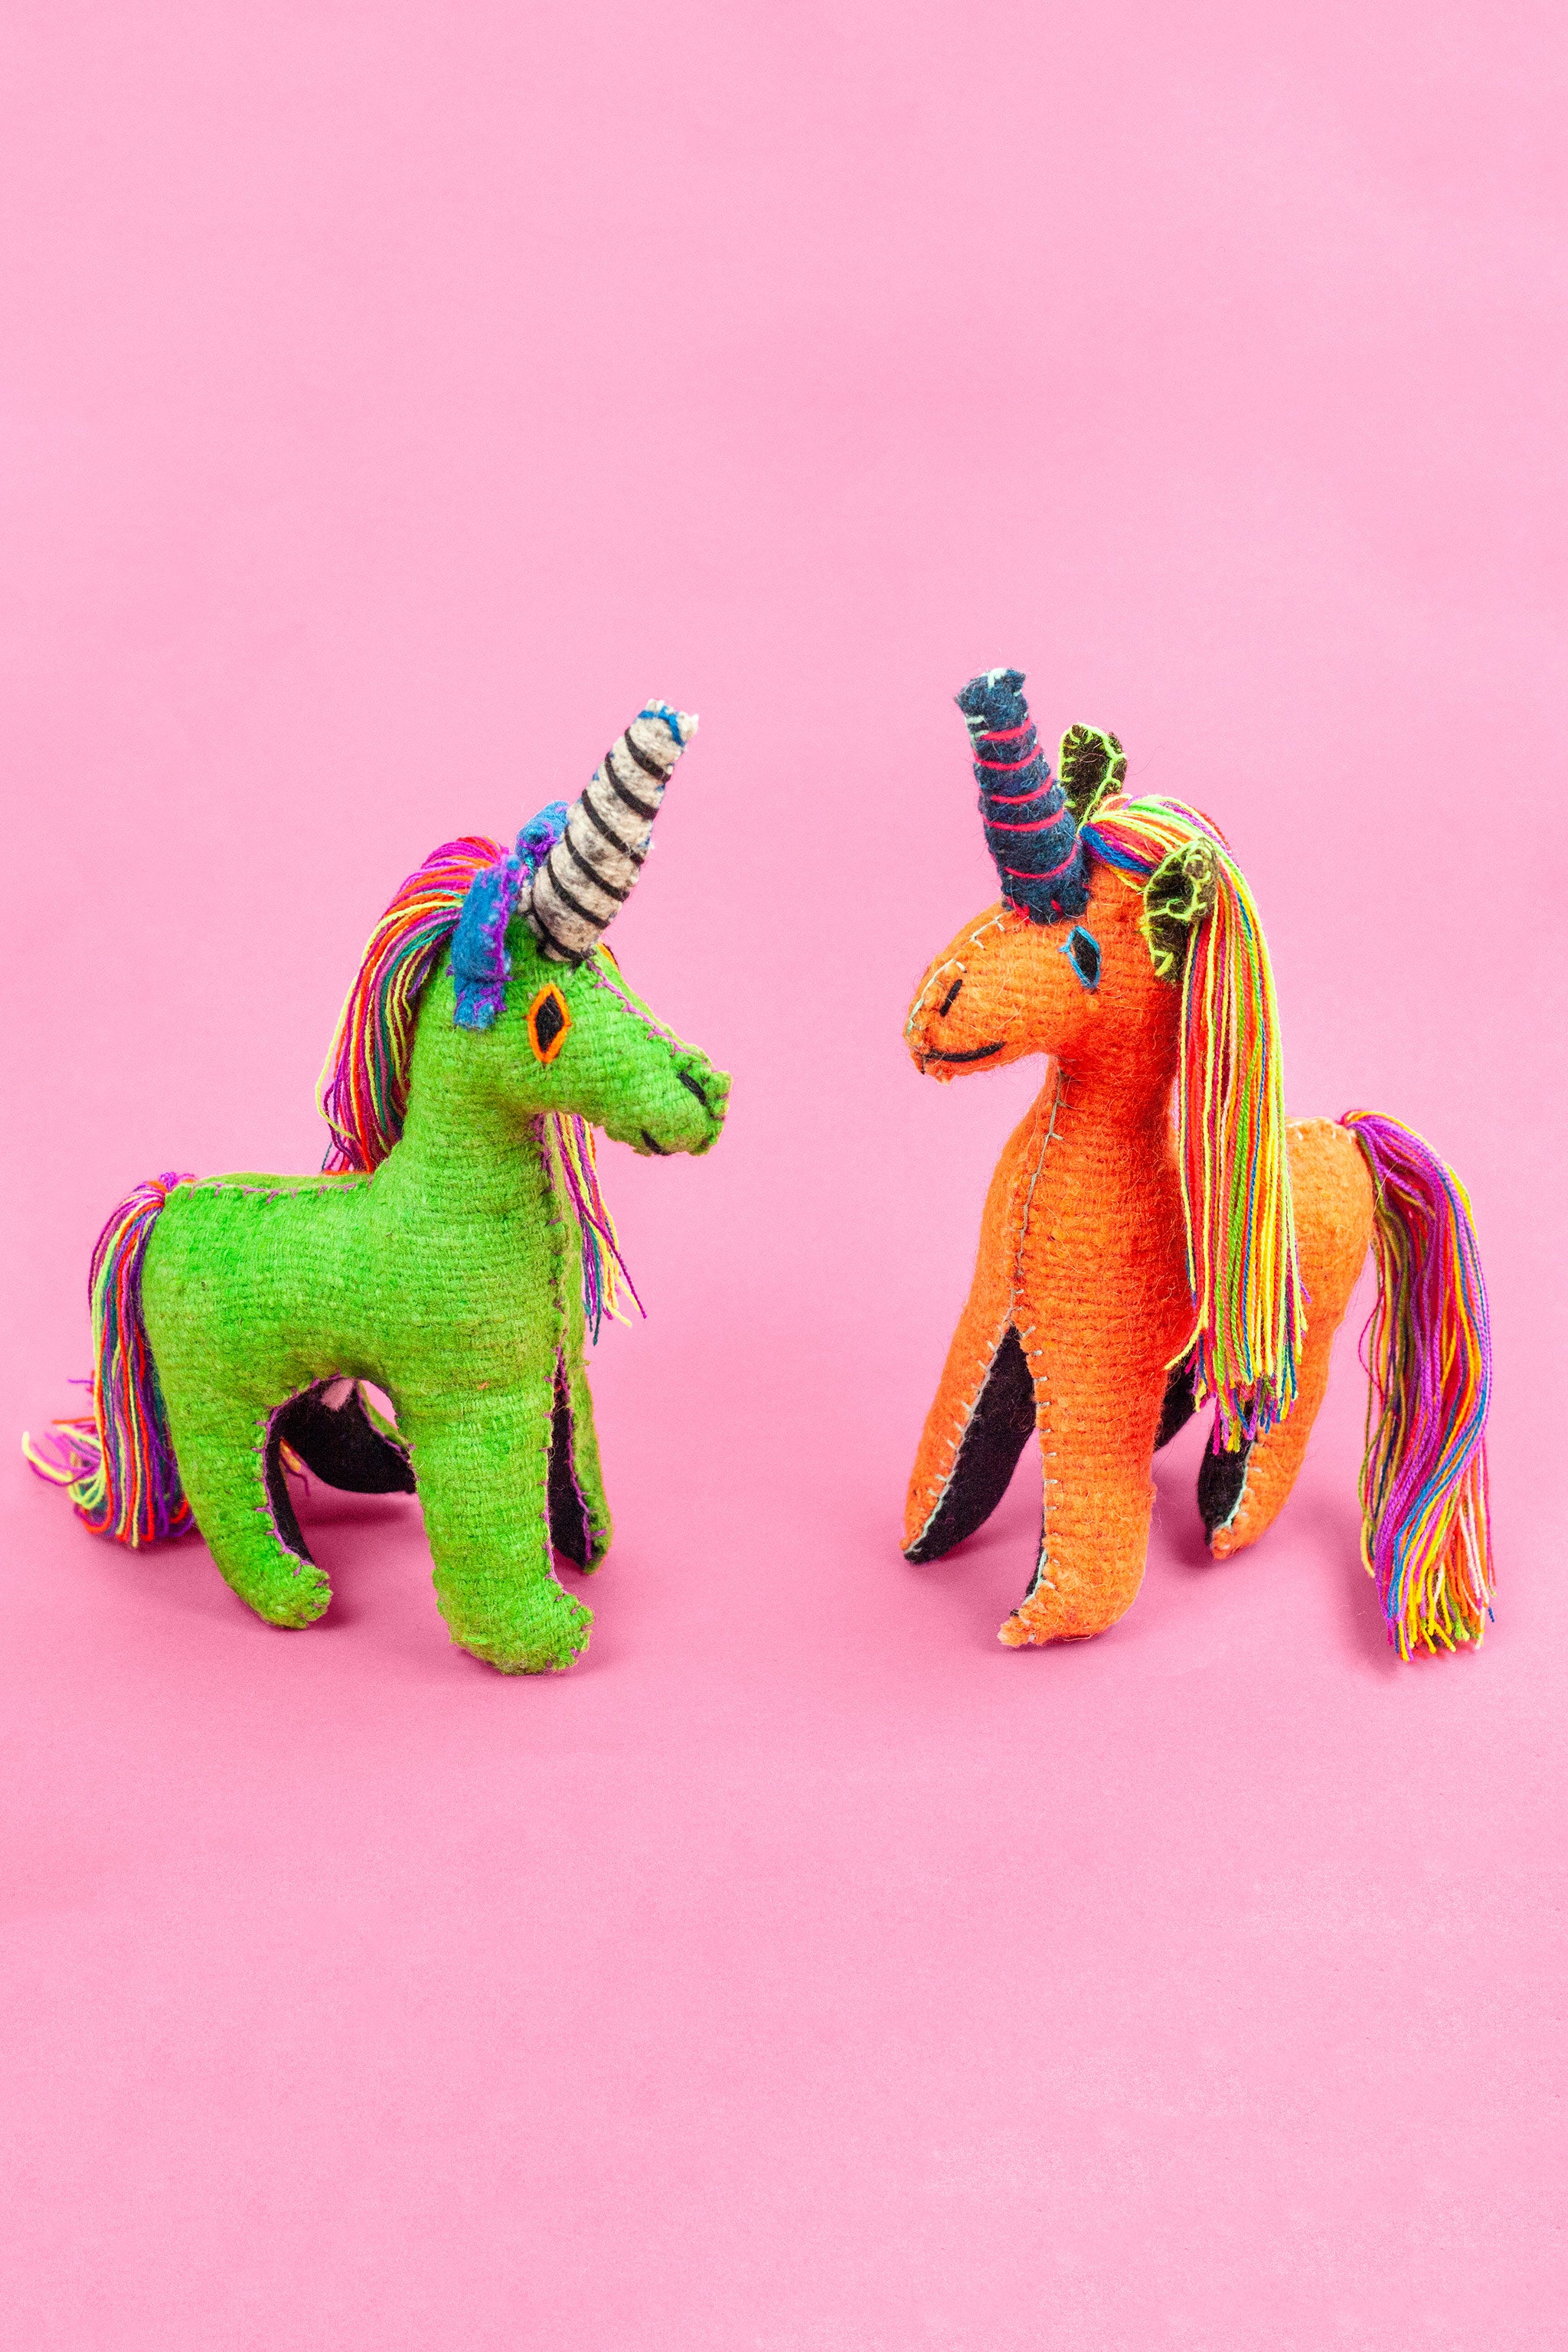 Two colorful felt unicorn plush toys with colorful fringe manes and tails and hand-embroidered features.